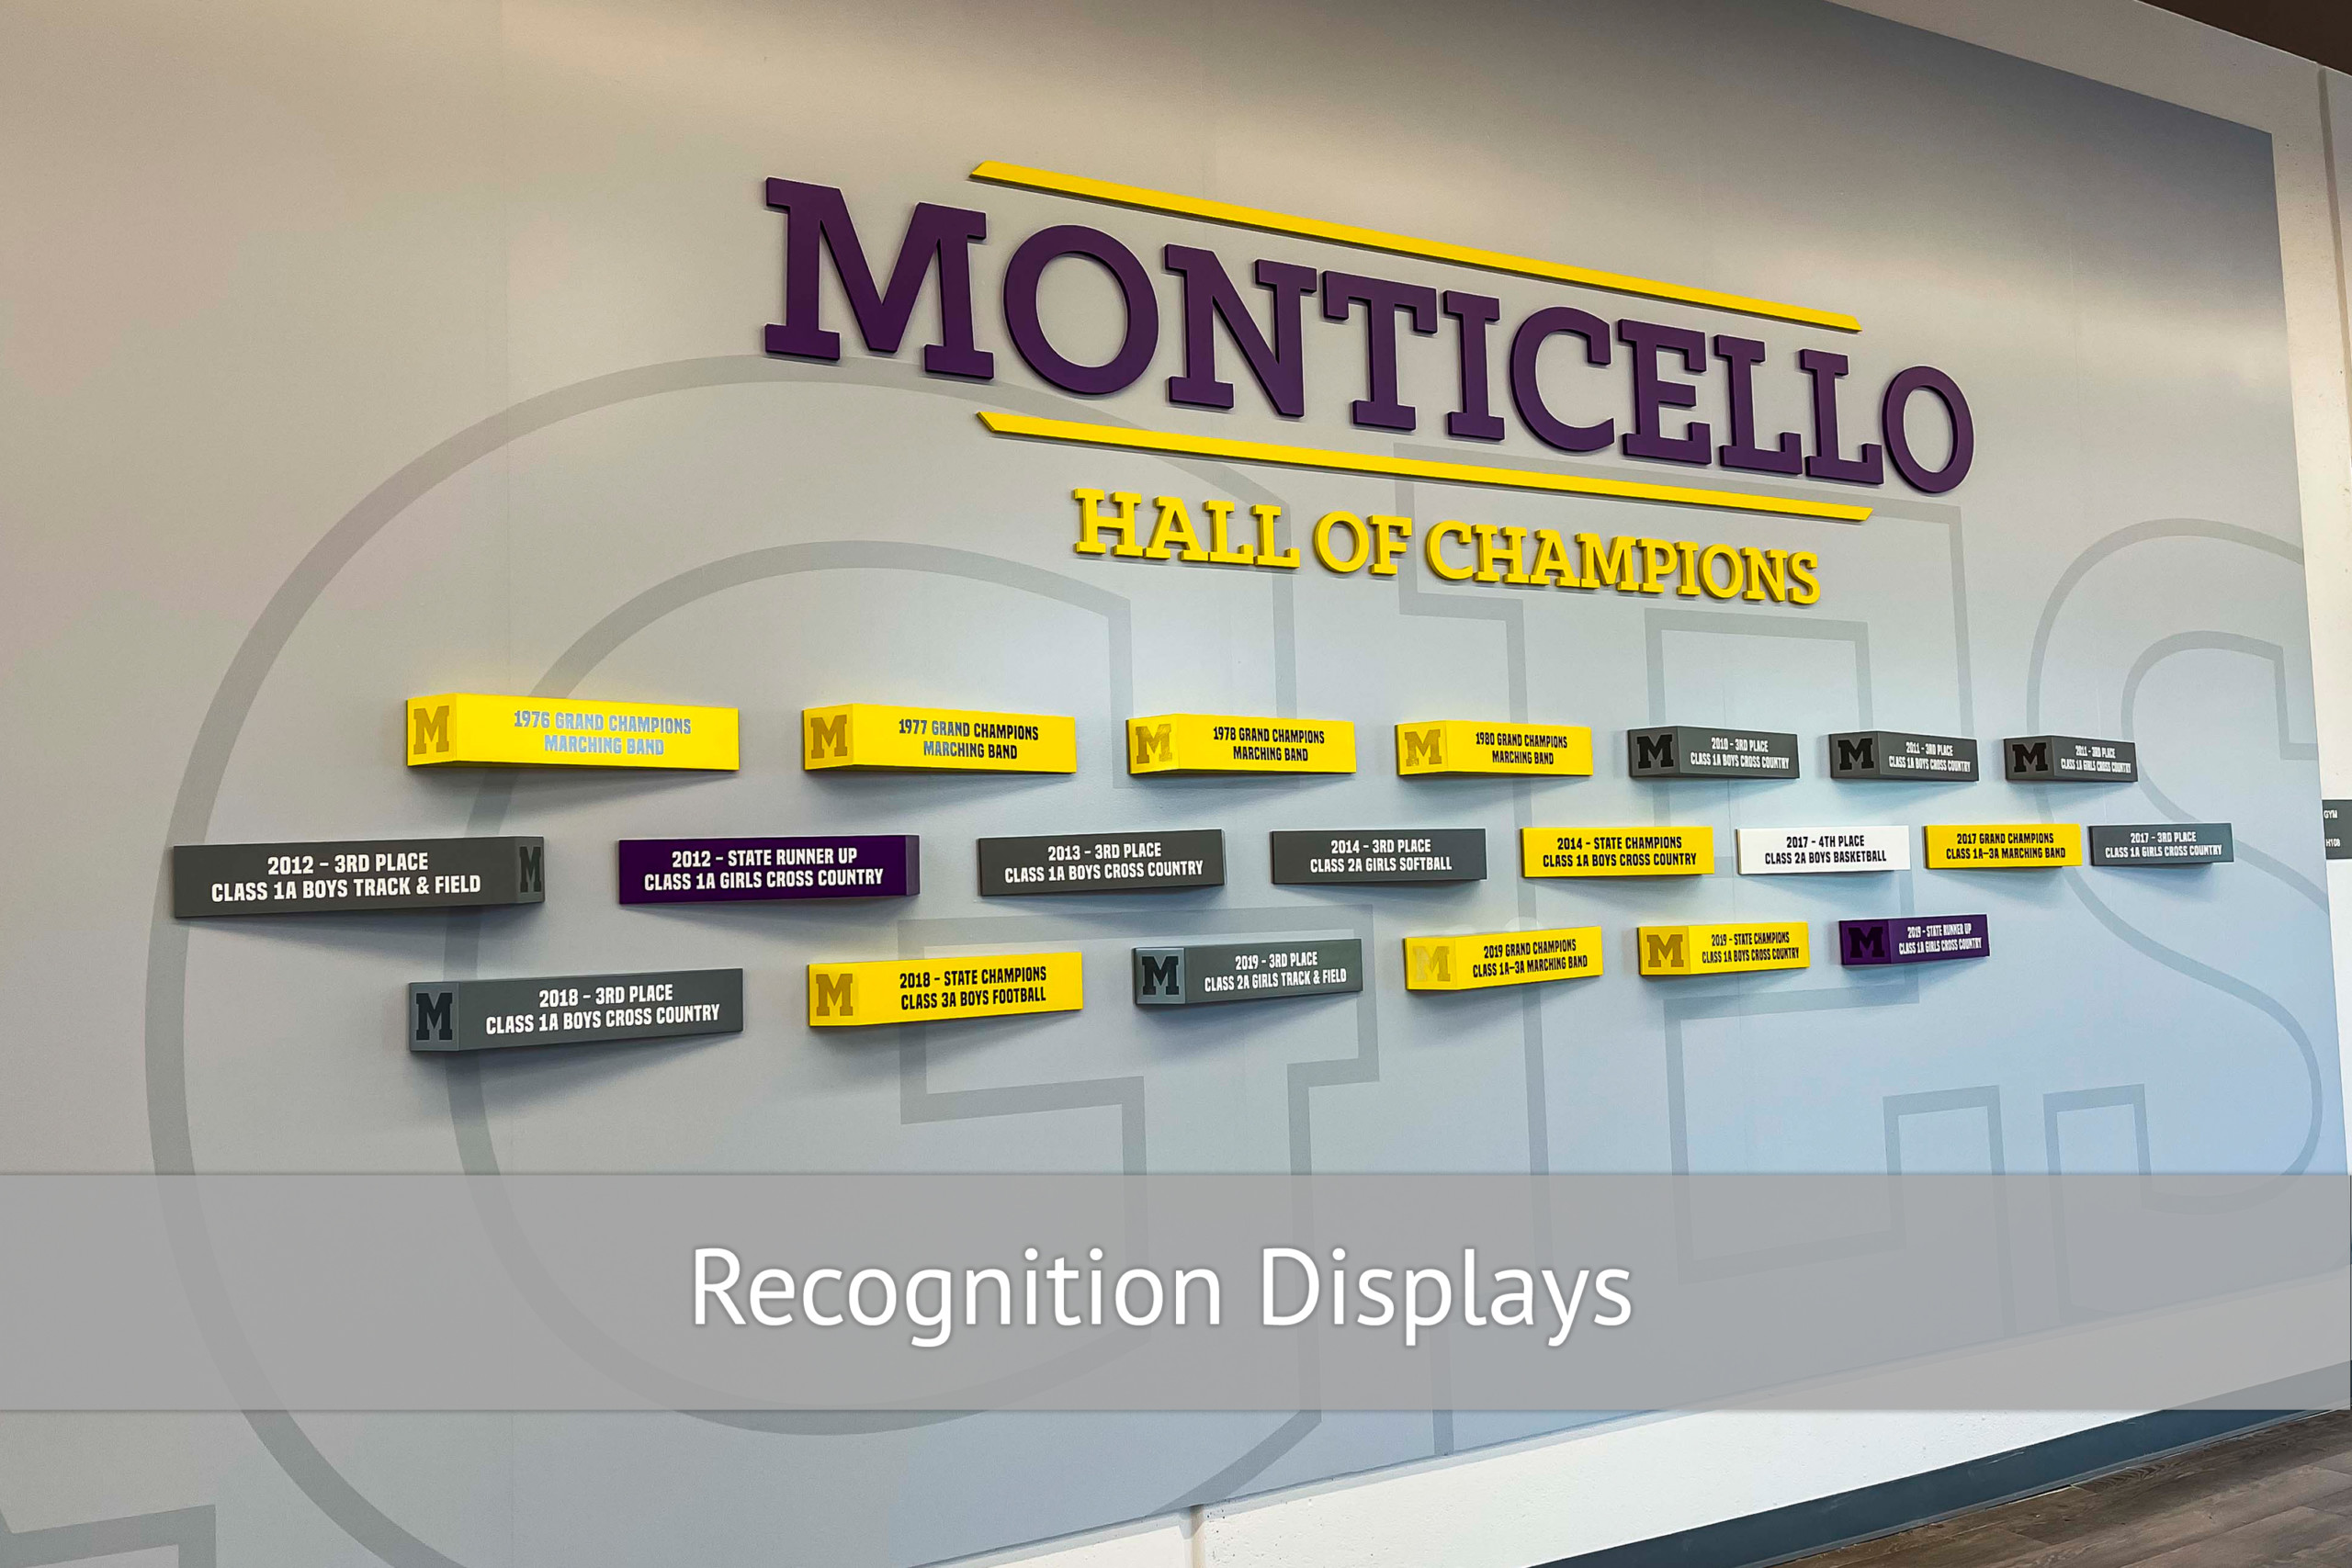 Monticello - Recognition Displays